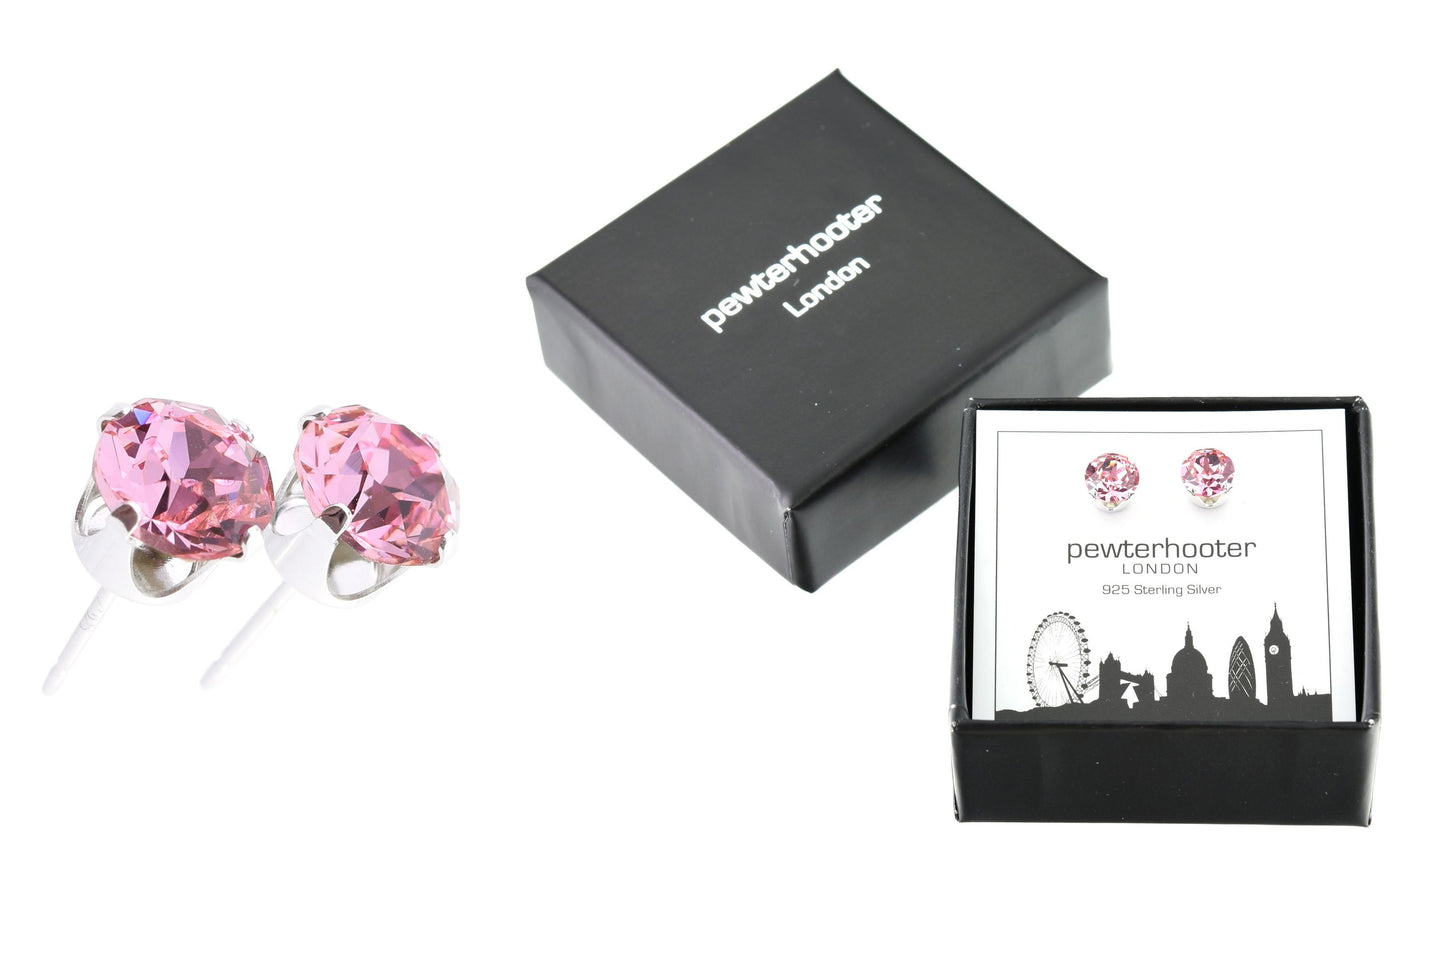 pewterhooter® Women's Classic Collection 925 Sterling silver earrings with sparkling Light Pink crystals, packaged in a gift box for any occasion.